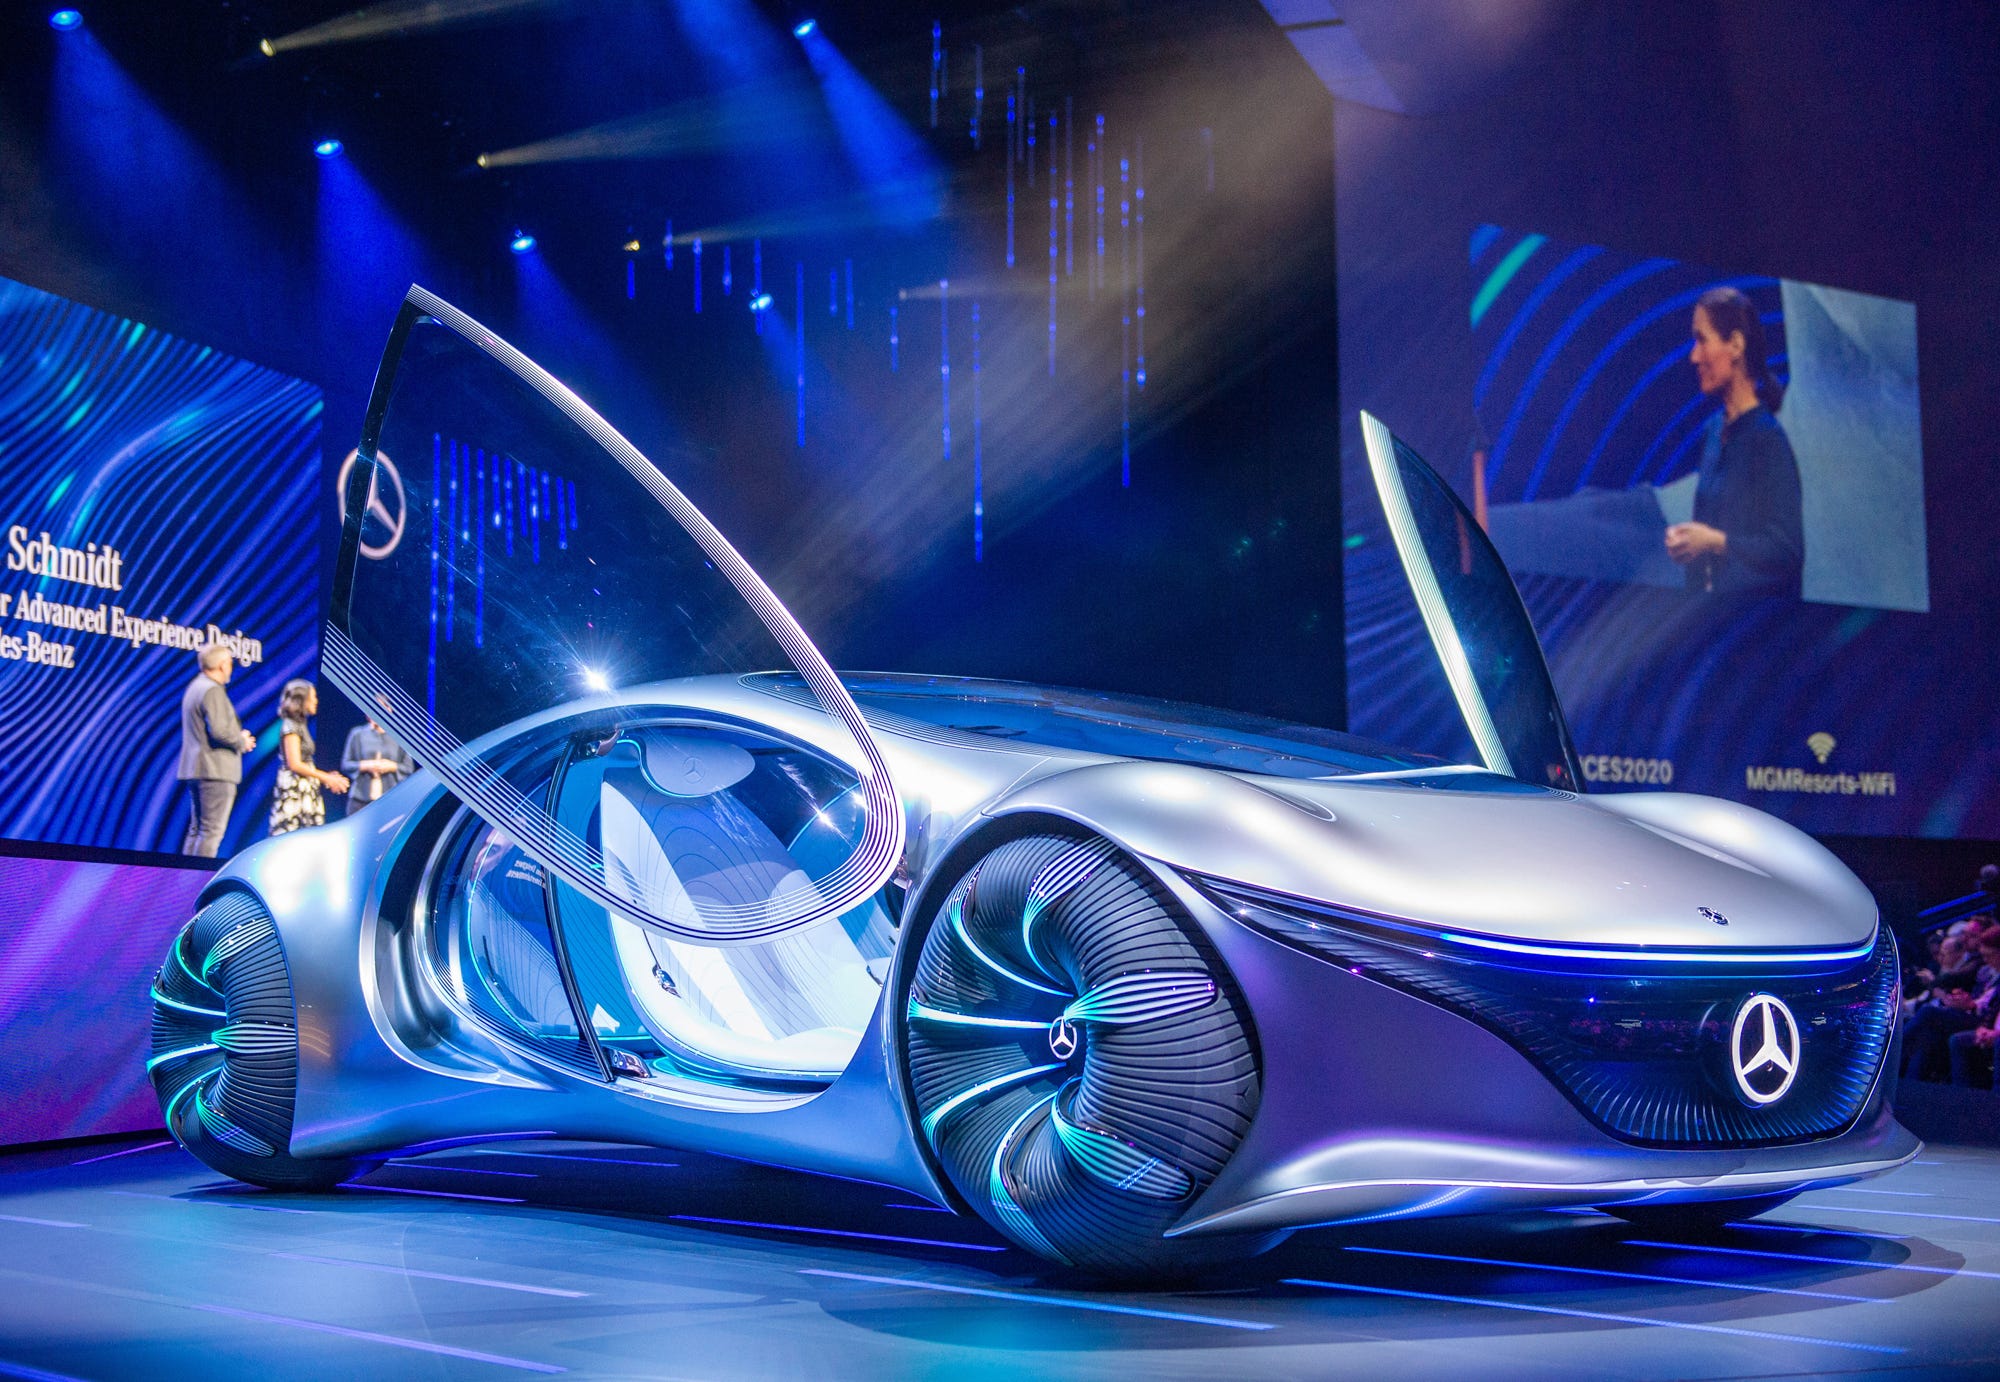 With Avatarinspired concept car MercedesBenz goes Hollywood  Mint  AskBetterQuestions